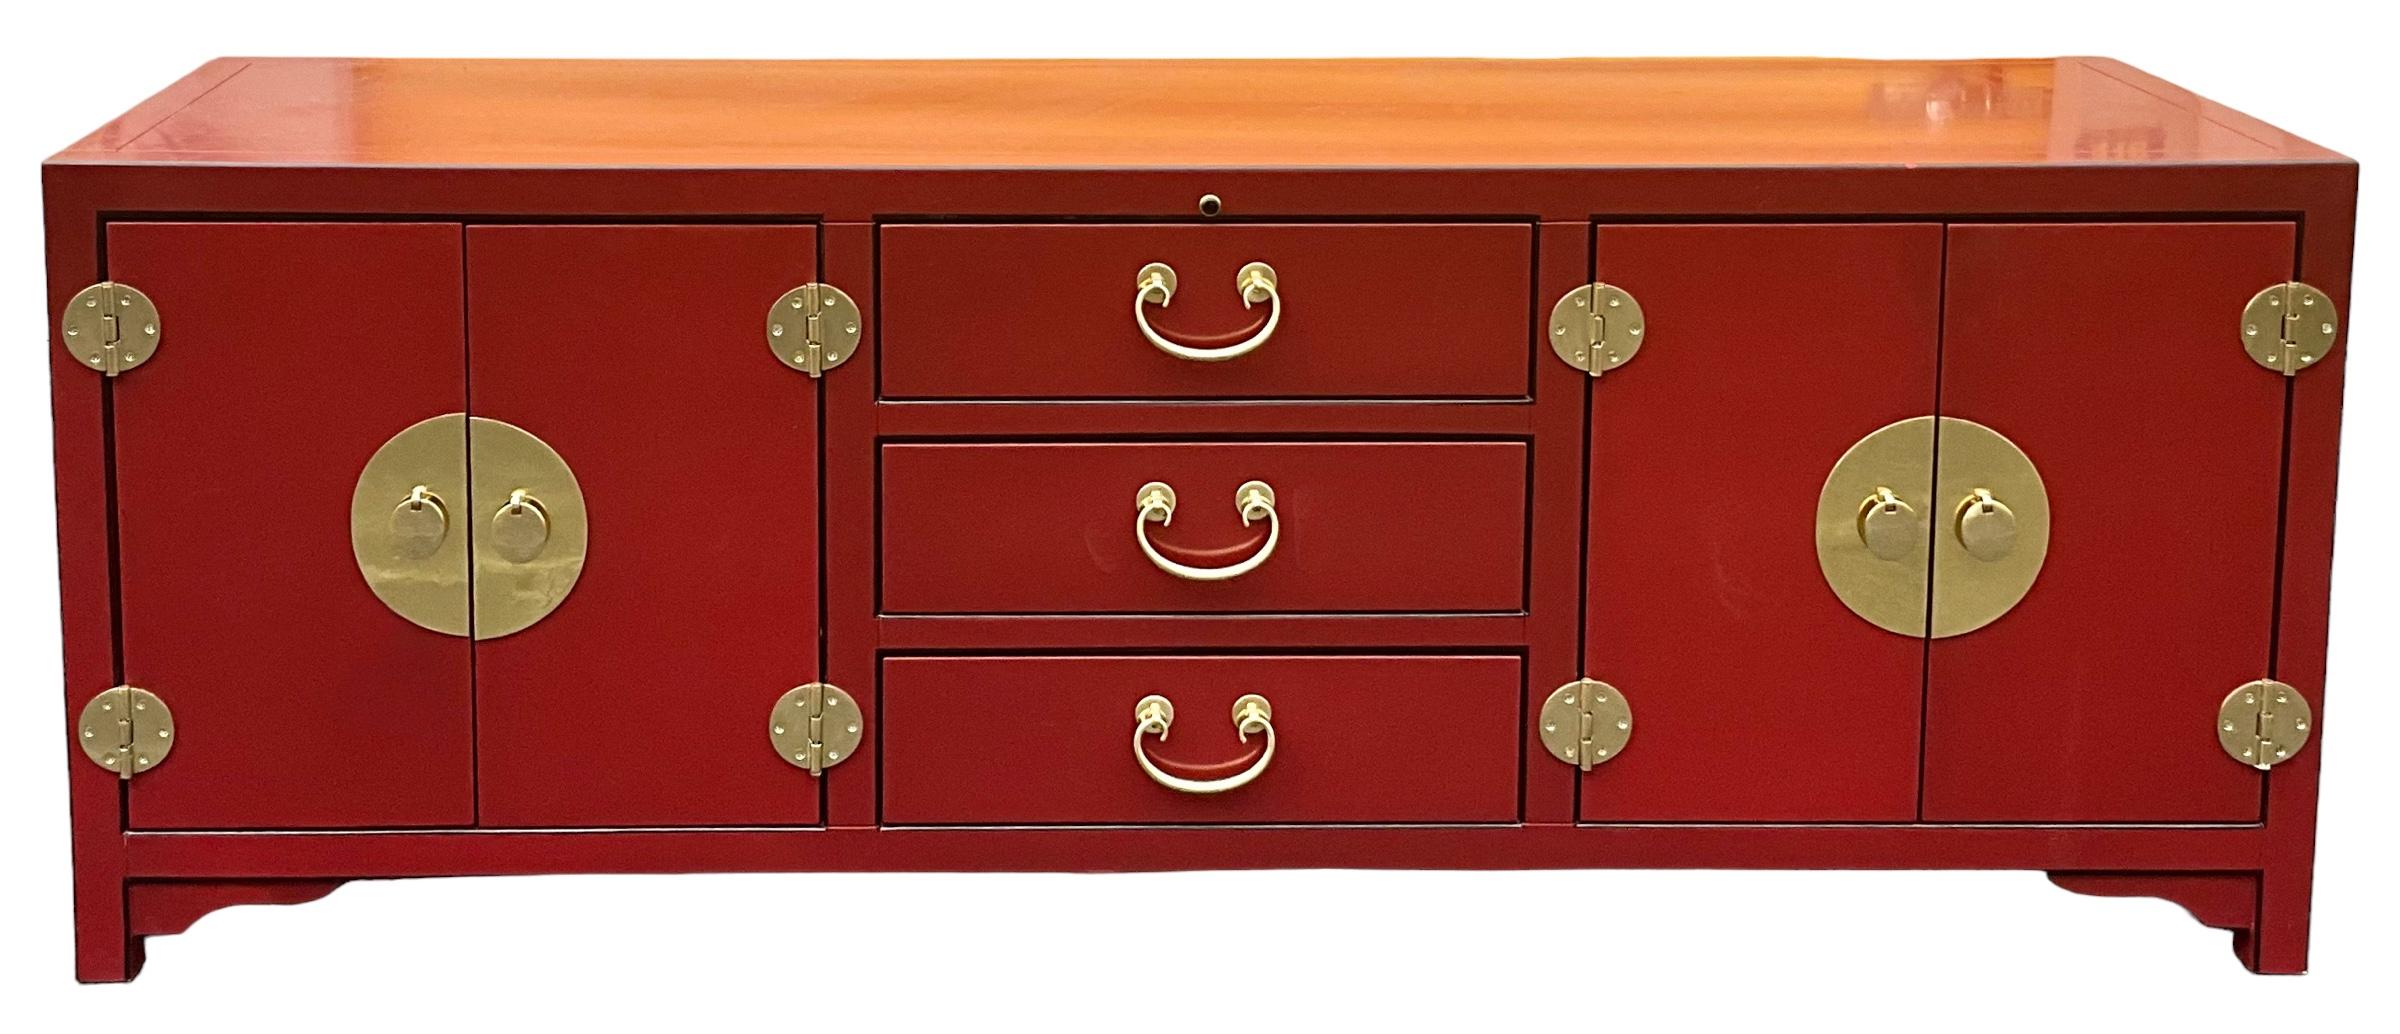 American Late 20th-C. Ming Style Red Lacquer & Brass Credenza / Media Cabinet By Sligh  For Sale